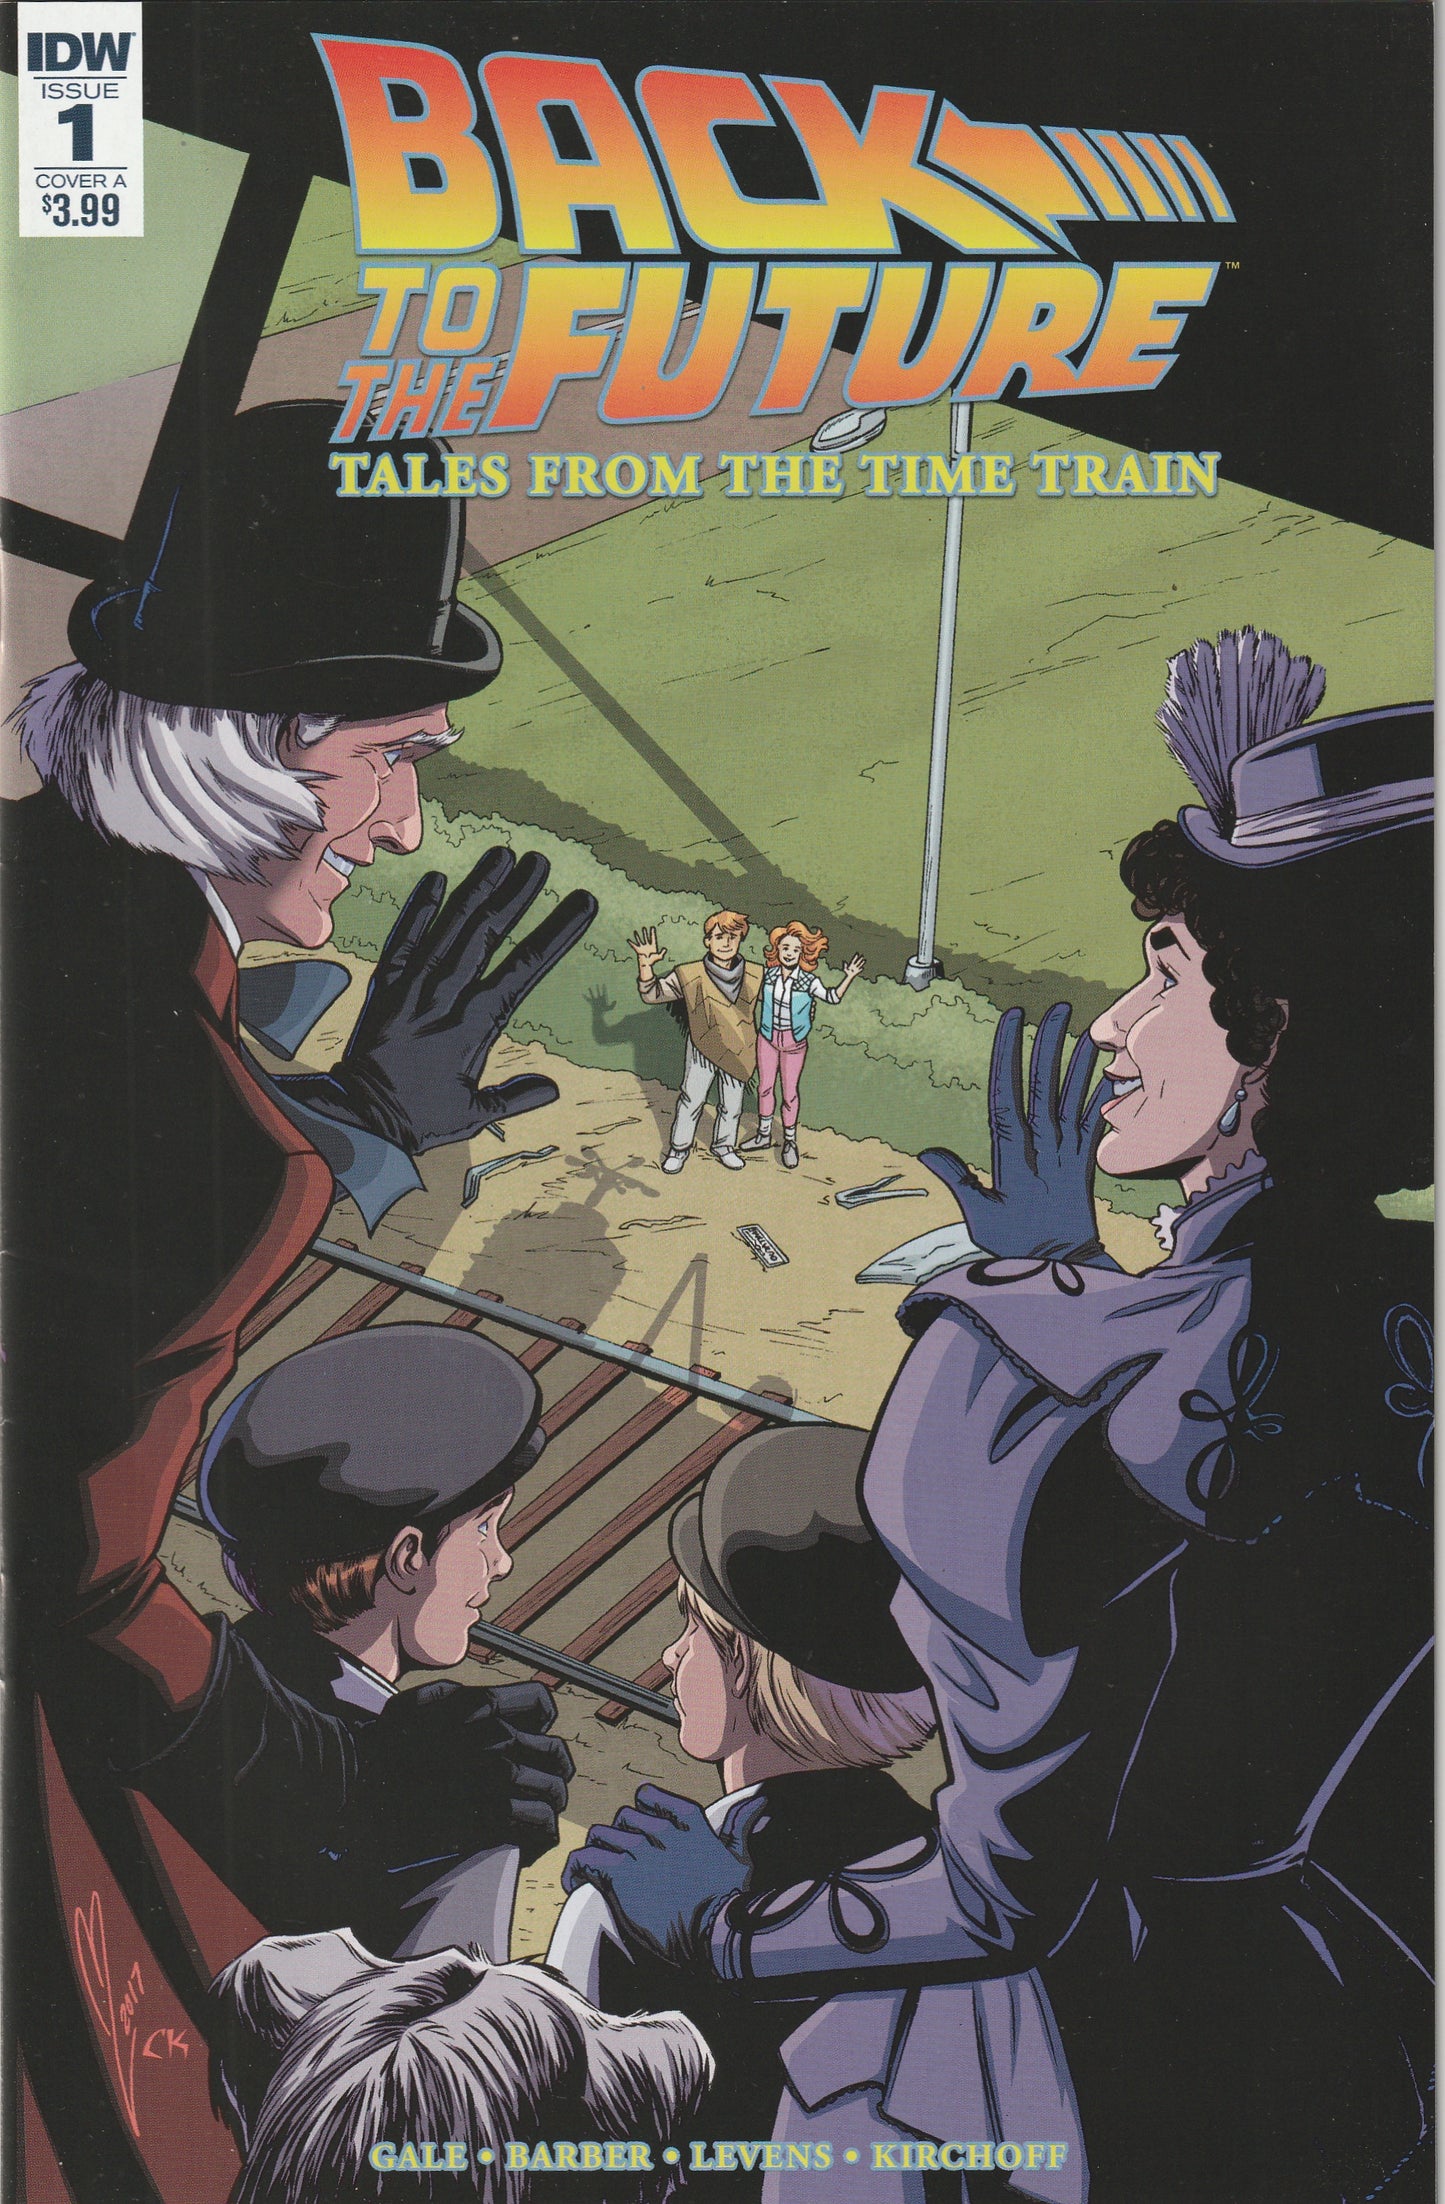 Back to the Future: Tales From the Time Train #1 (2017) - Cover A